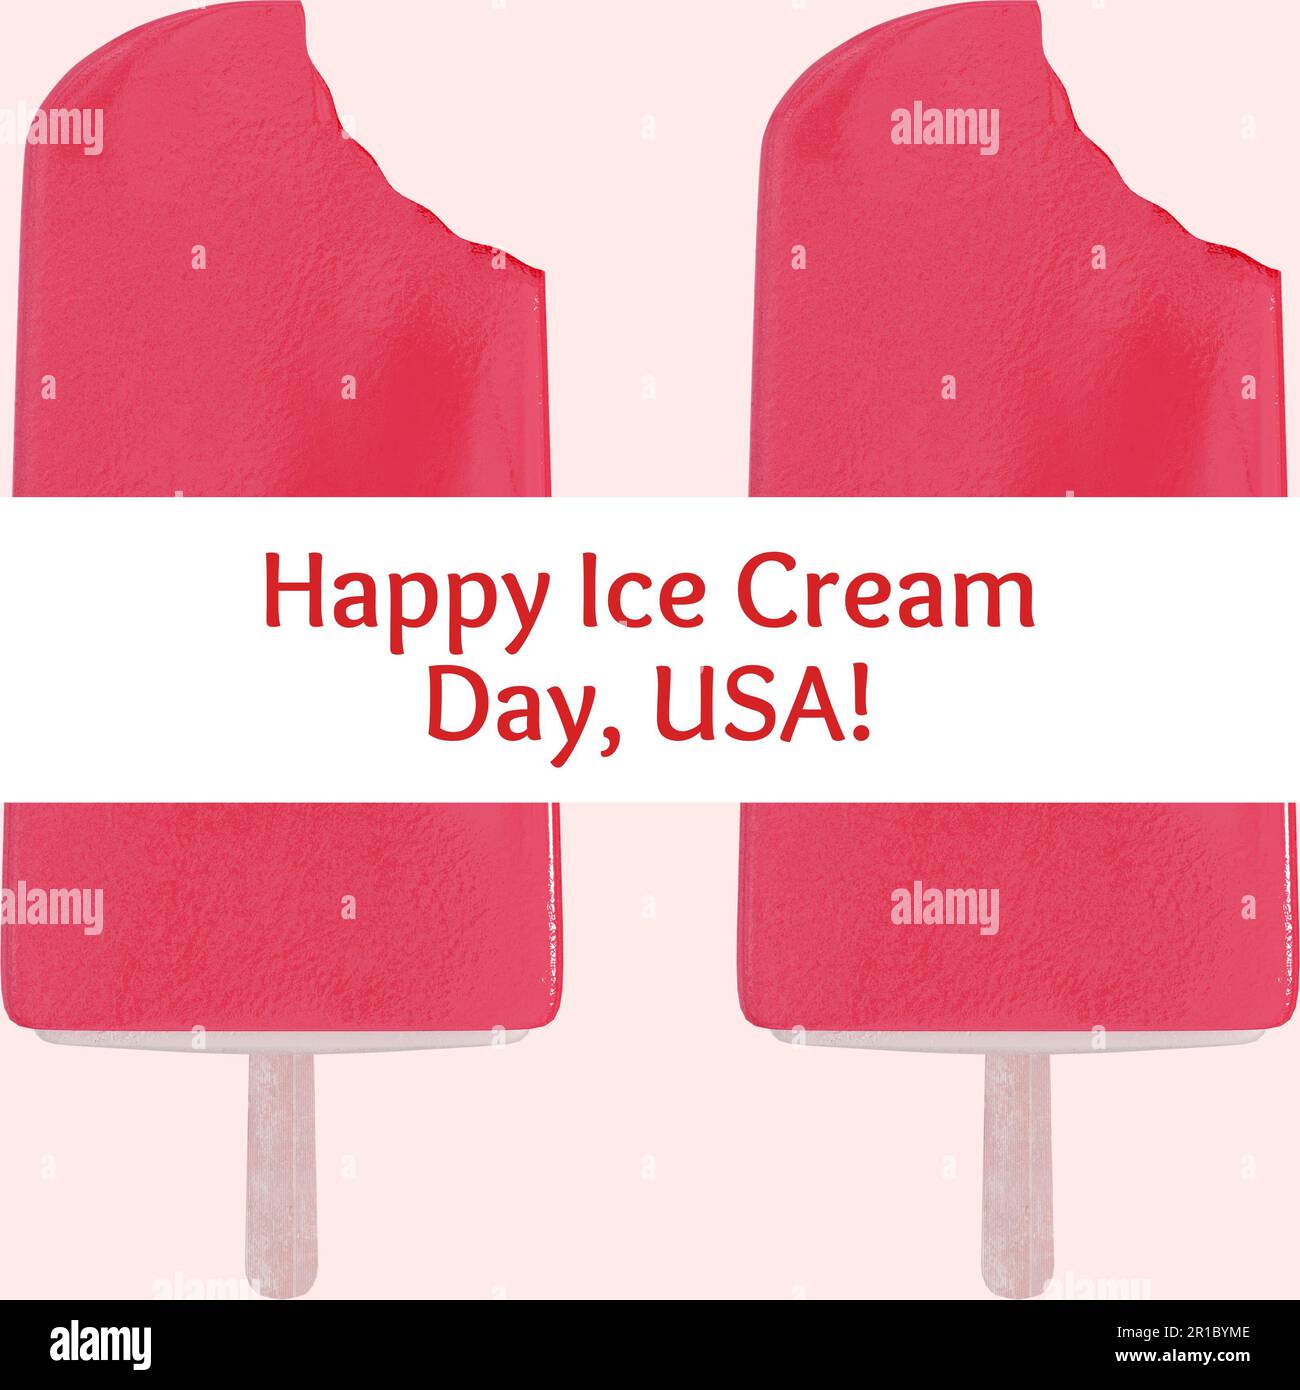 Composition of happy ice cream day text over red ice cream Stock Photo